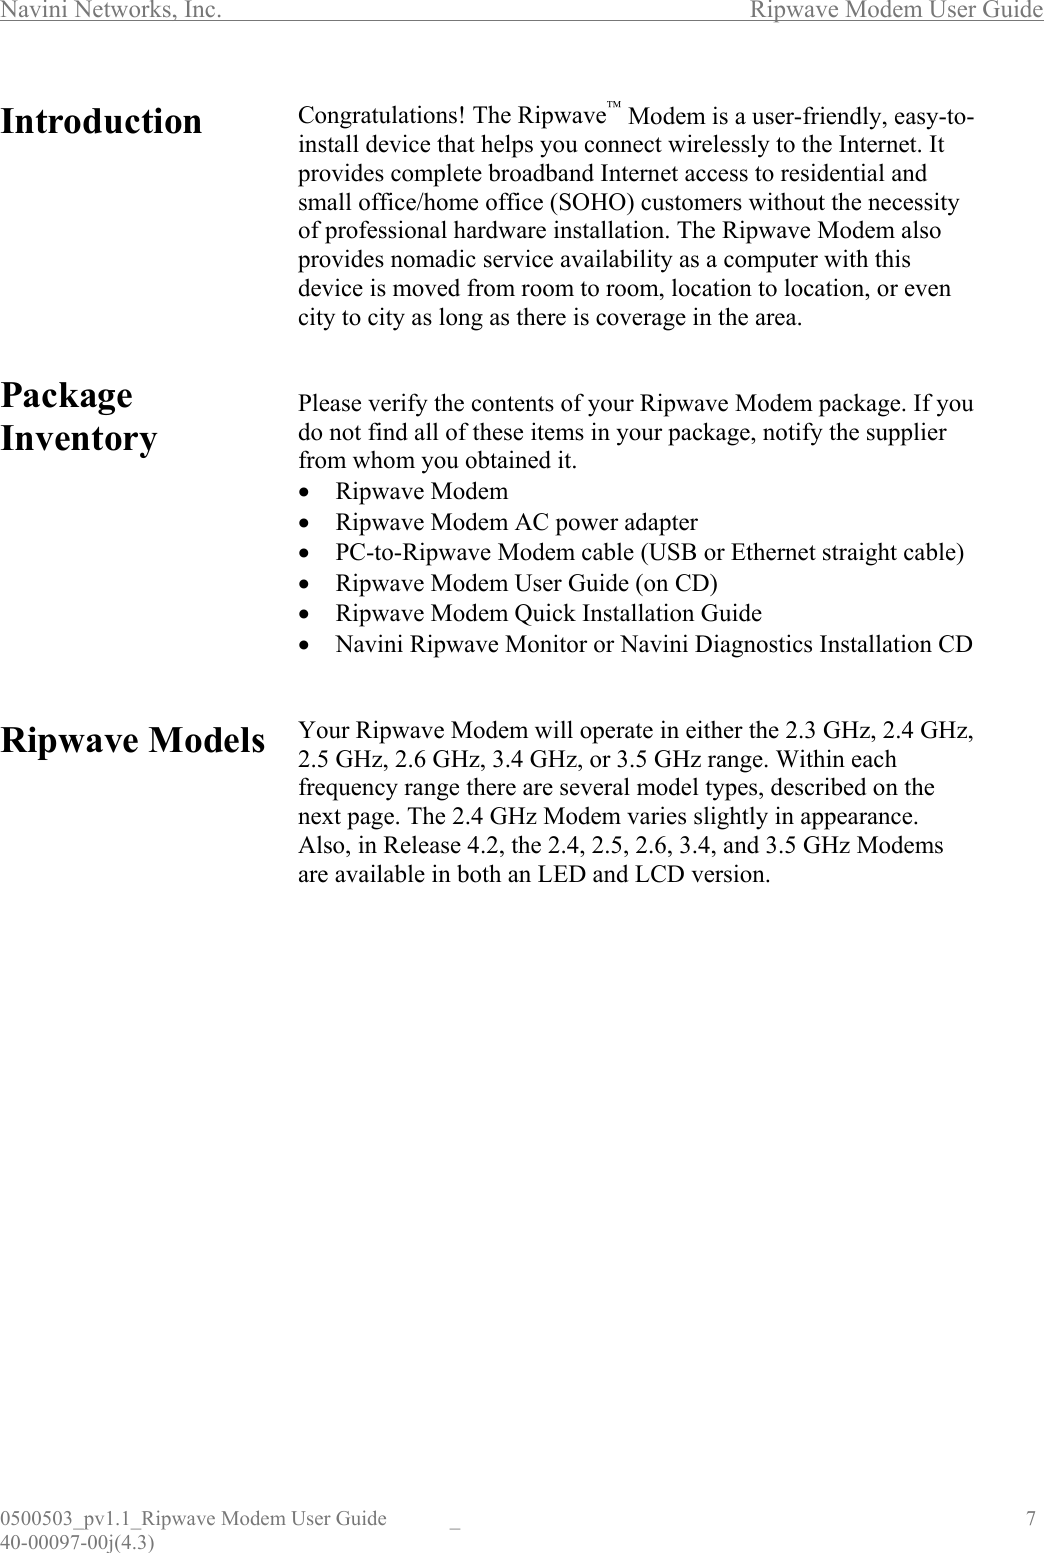 Navini Networks, Inc.        Ripwave Modem User Guide 0500503_pv1.1_Ripwave Modem User Guide  _                                    7 40-00097-00j(4.3) Introduction         Package Inventory          Ripwave Models                        Congratulations! The Ripwave Modem is a user-friendly, easy-to-install device that helps you connect wirelessly to the Internet. It provides complete broadband Internet access to residential and small office/home office (SOHO) customers without the necessity of professional hardware installation. The Ripwave Modem also provides nomadic service availability as a computer with this device is moved from room to room, location to location, or even city to city as long as there is coverage in the area.   Please verify the contents of your Ripwave Modem package. If you do not find all of these items in your package, notify the supplier from whom you obtained it. •  Ripwave Modem •  Ripwave Modem AC power adapter •  PC-to-Ripwave Modem cable (USB or Ethernet straight cable) •  Ripwave Modem User Guide (on CD) •  Ripwave Modem Quick Installation Guide •  Navini Ripwave Monitor or Navini Diagnostics Installation CD   Your Ripwave Modem will operate in either the 2.3 GHz, 2.4 GHz, 2.5 GHz, 2.6 GHz, 3.4 GHz, or 3.5 GHz range. Within each frequency range there are several model types, described on the next page. The 2.4 GHz Modem varies slightly in appearance. Also, in Release 4.2, the 2.4, 2.5, 2.6, 3.4, and 3.5 GHz Modems are available in both an LED and LCD version.                  